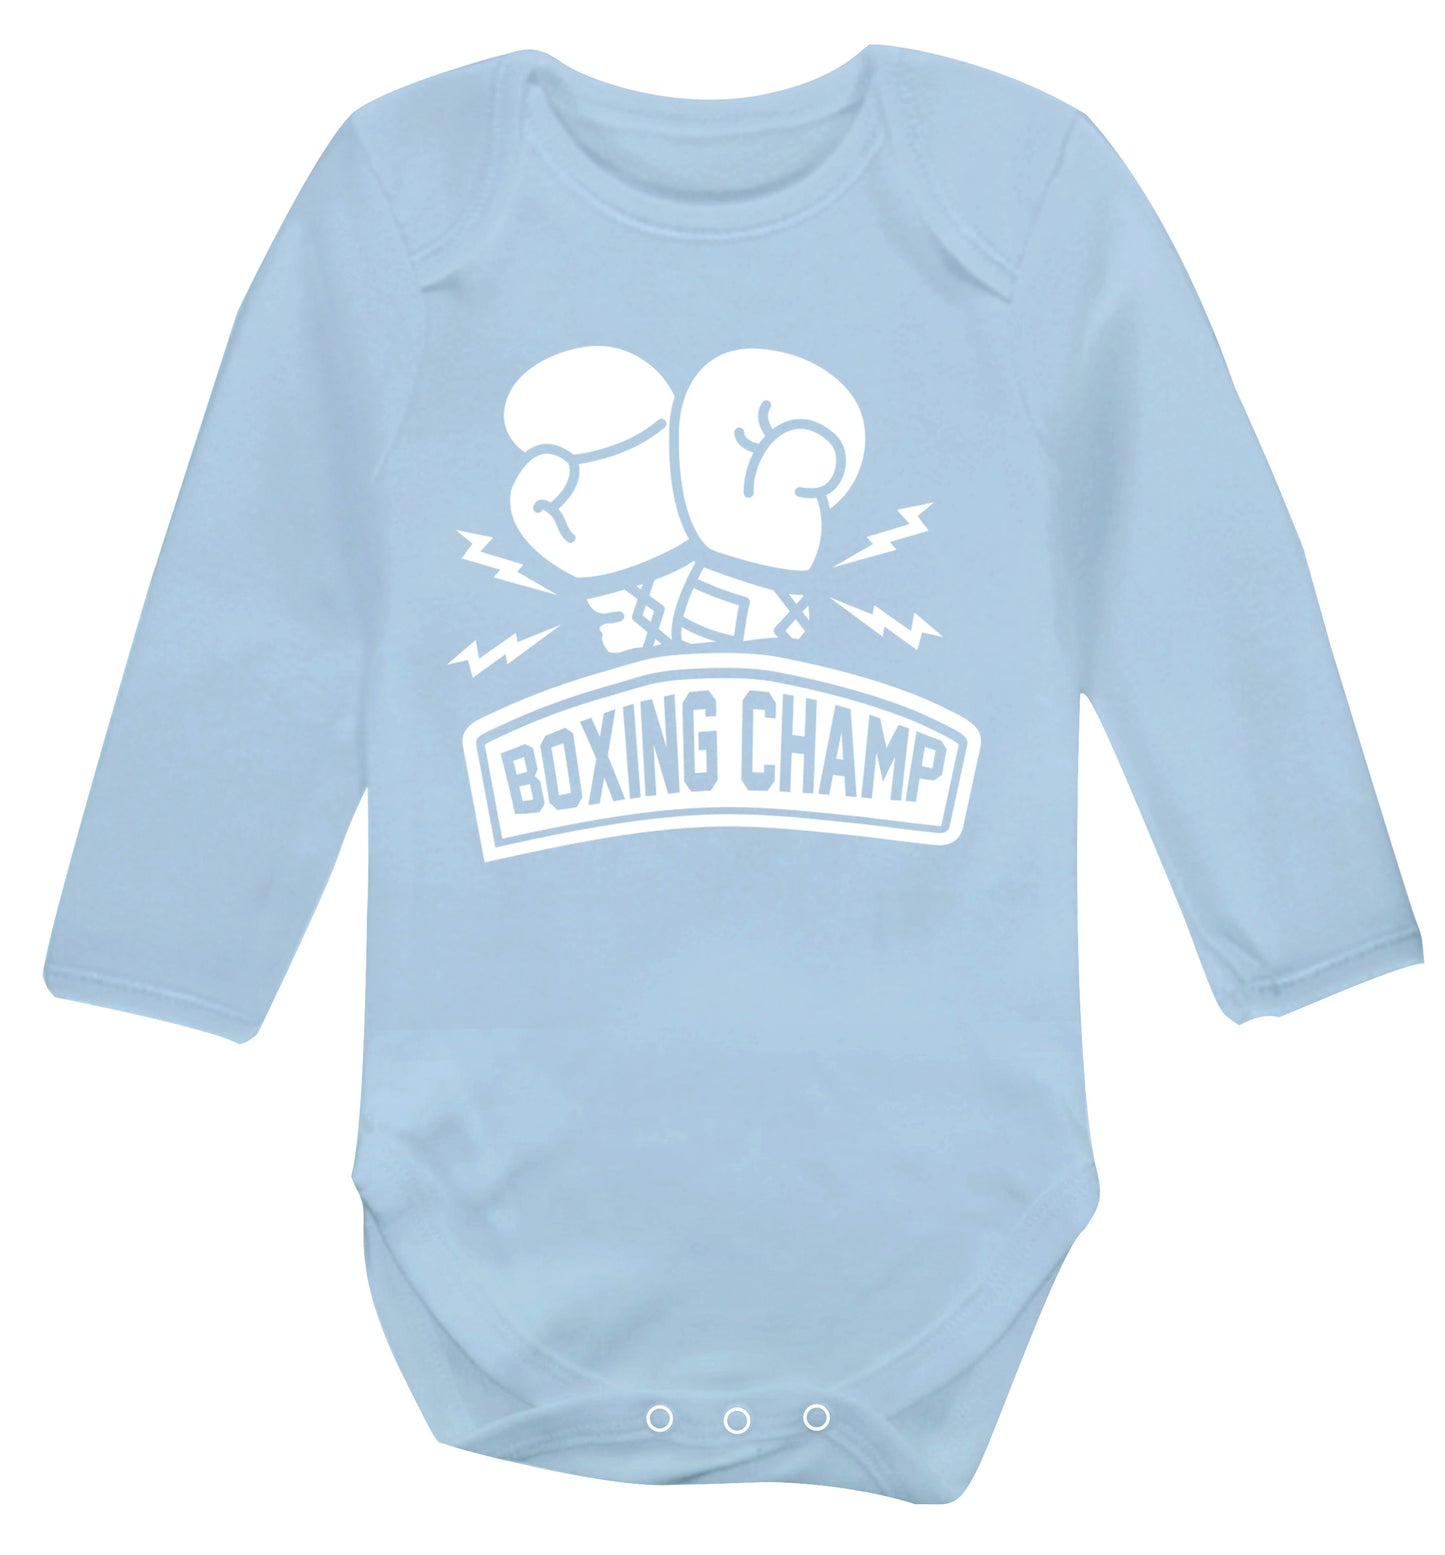 Boxing Champ Baby Vest long sleeved pale blue 6-12 months